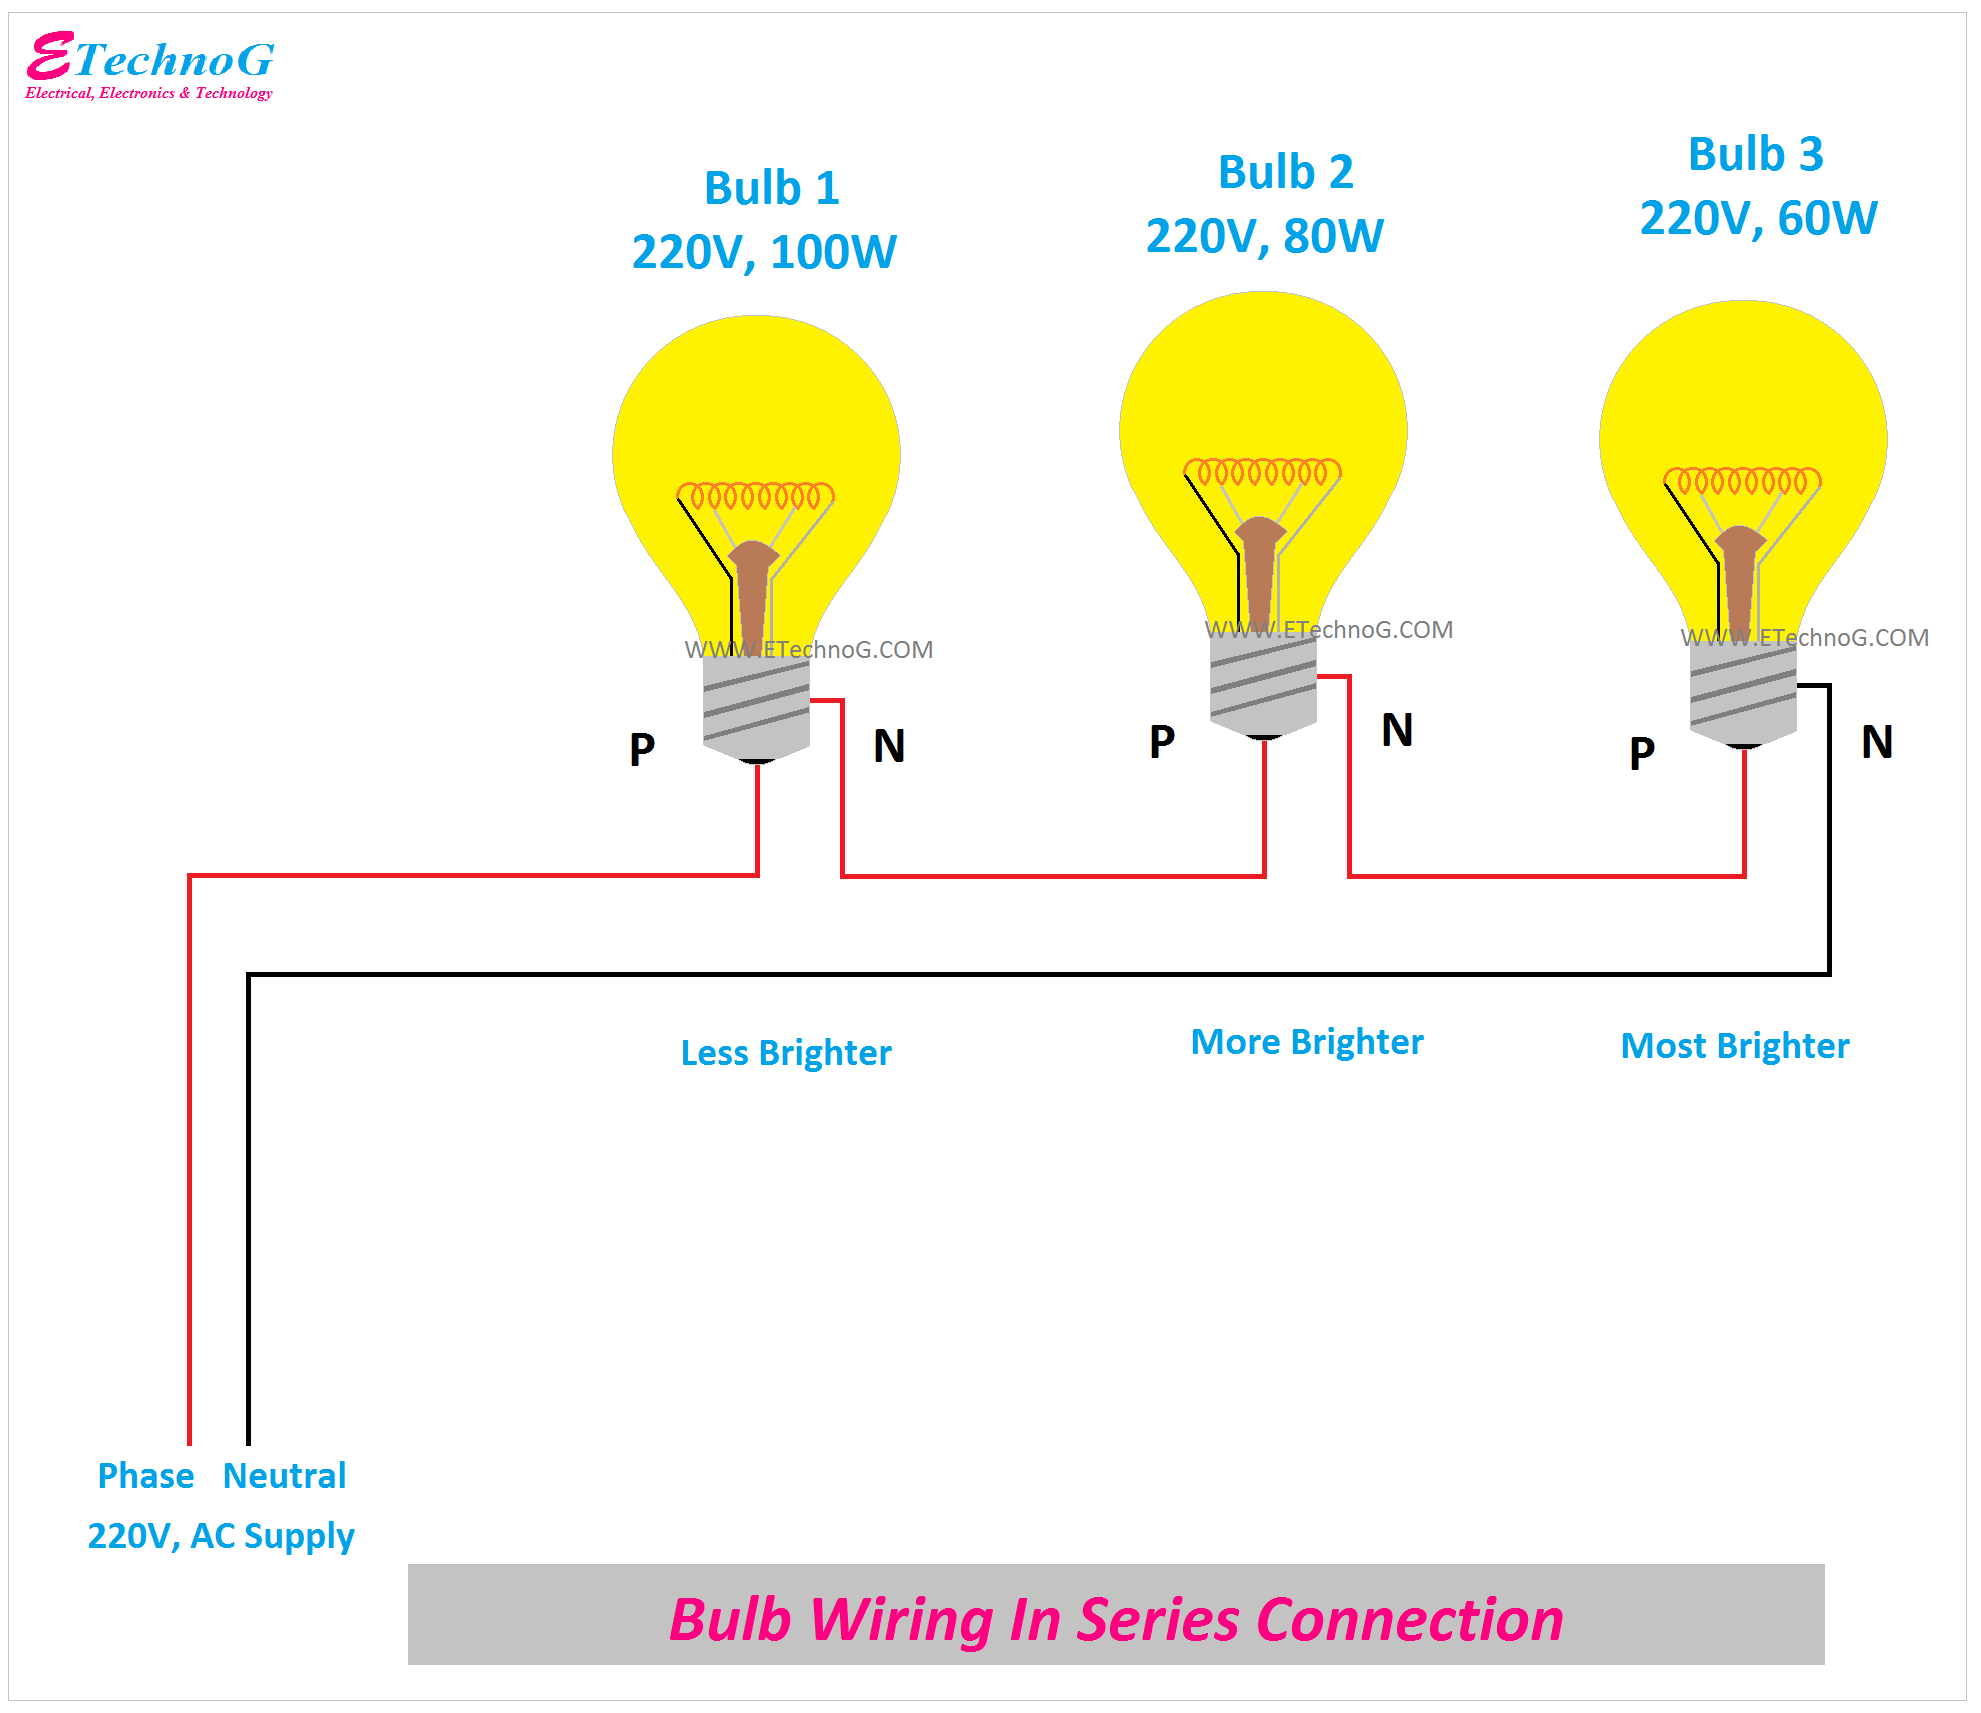 Bulb Wiring in Series Connection, Bulb Connection Diagram